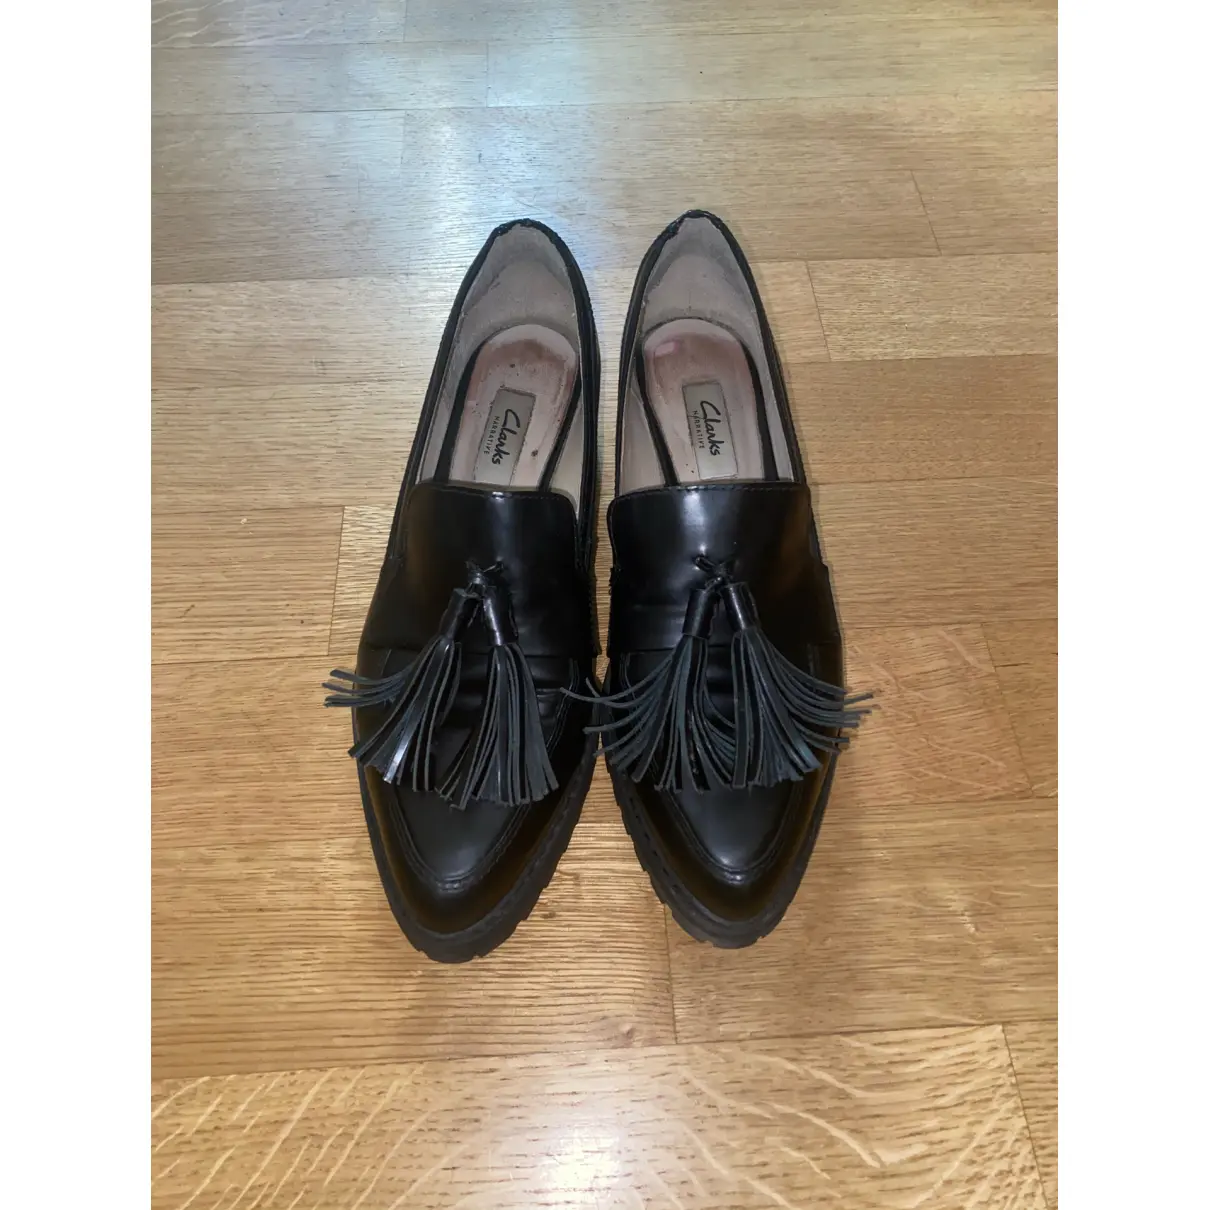 Buy Clarks Leather flats online